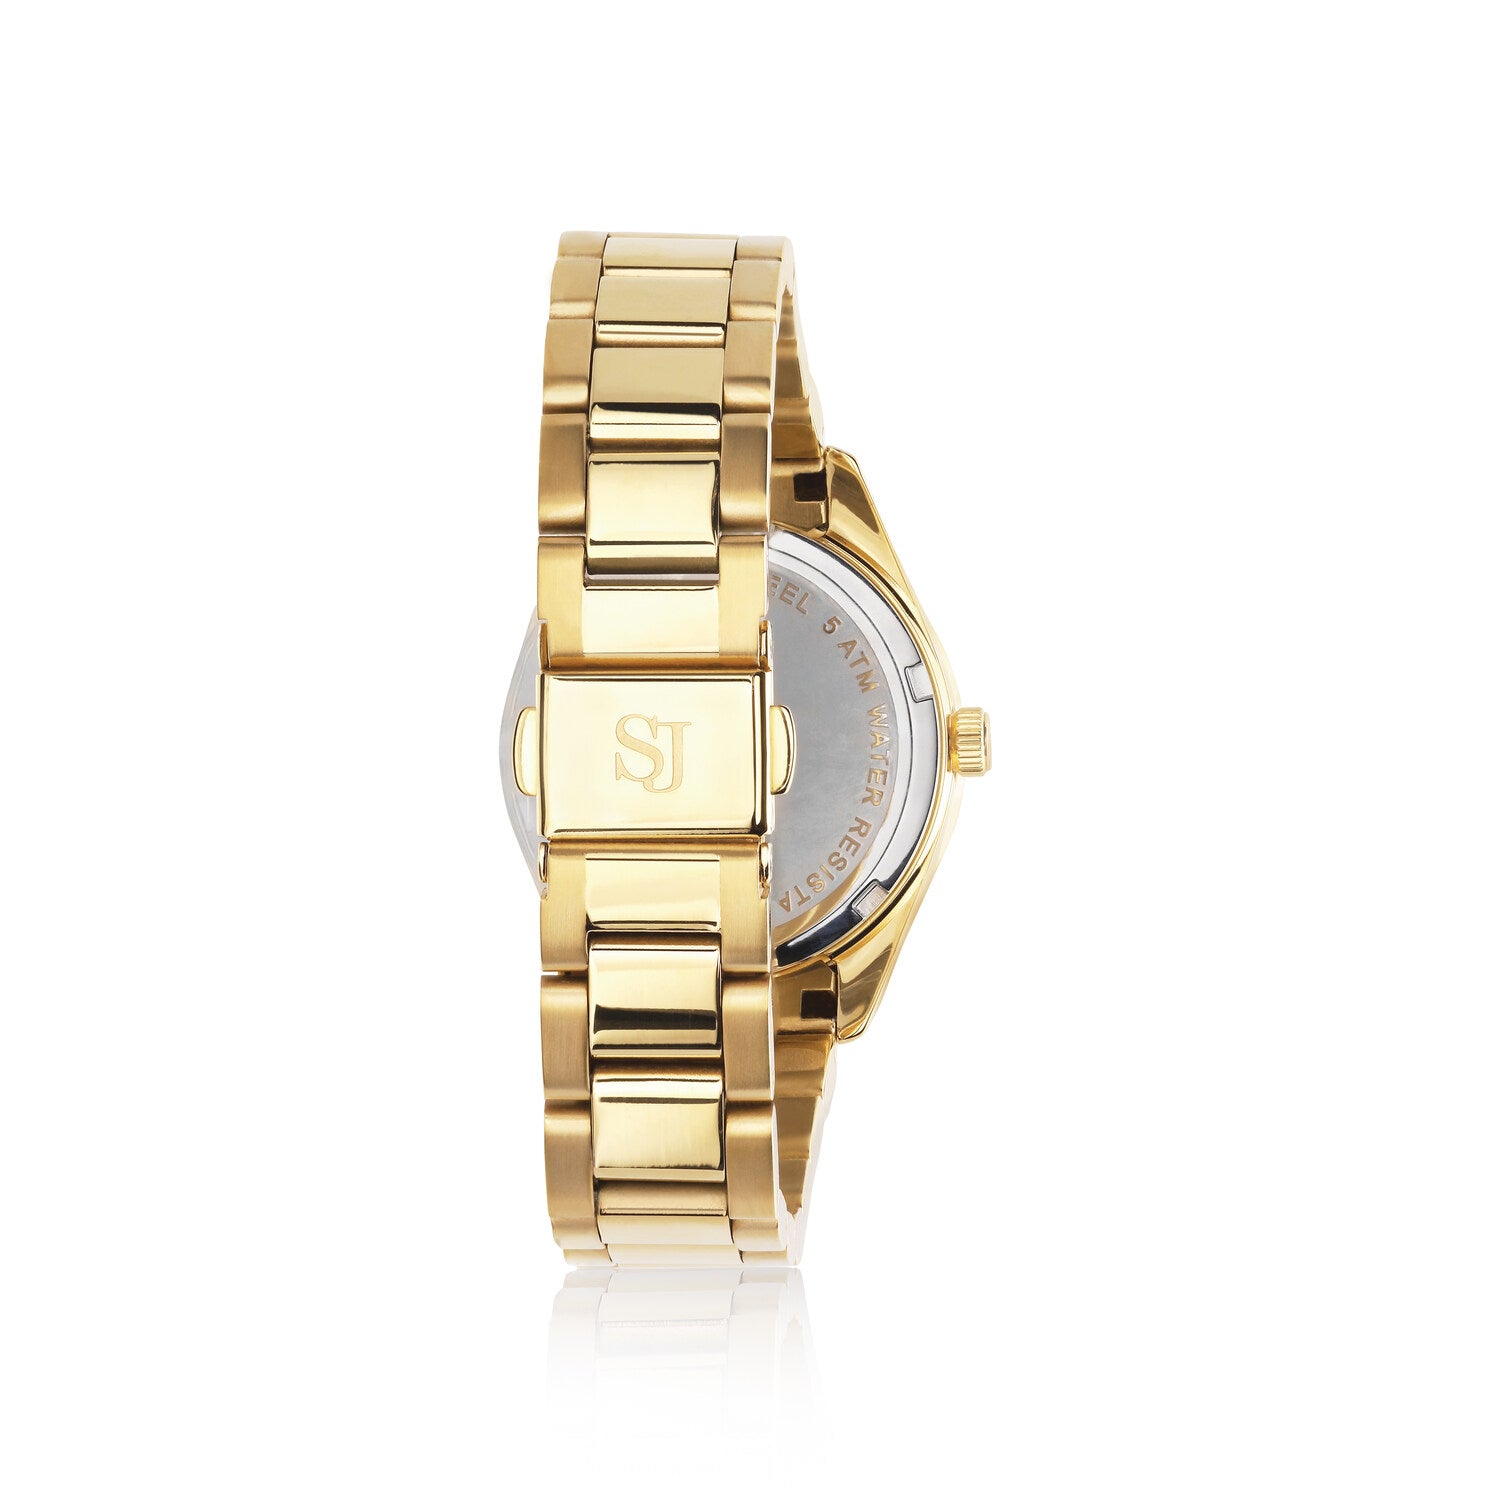 Stainless steel gold | Guld urskive